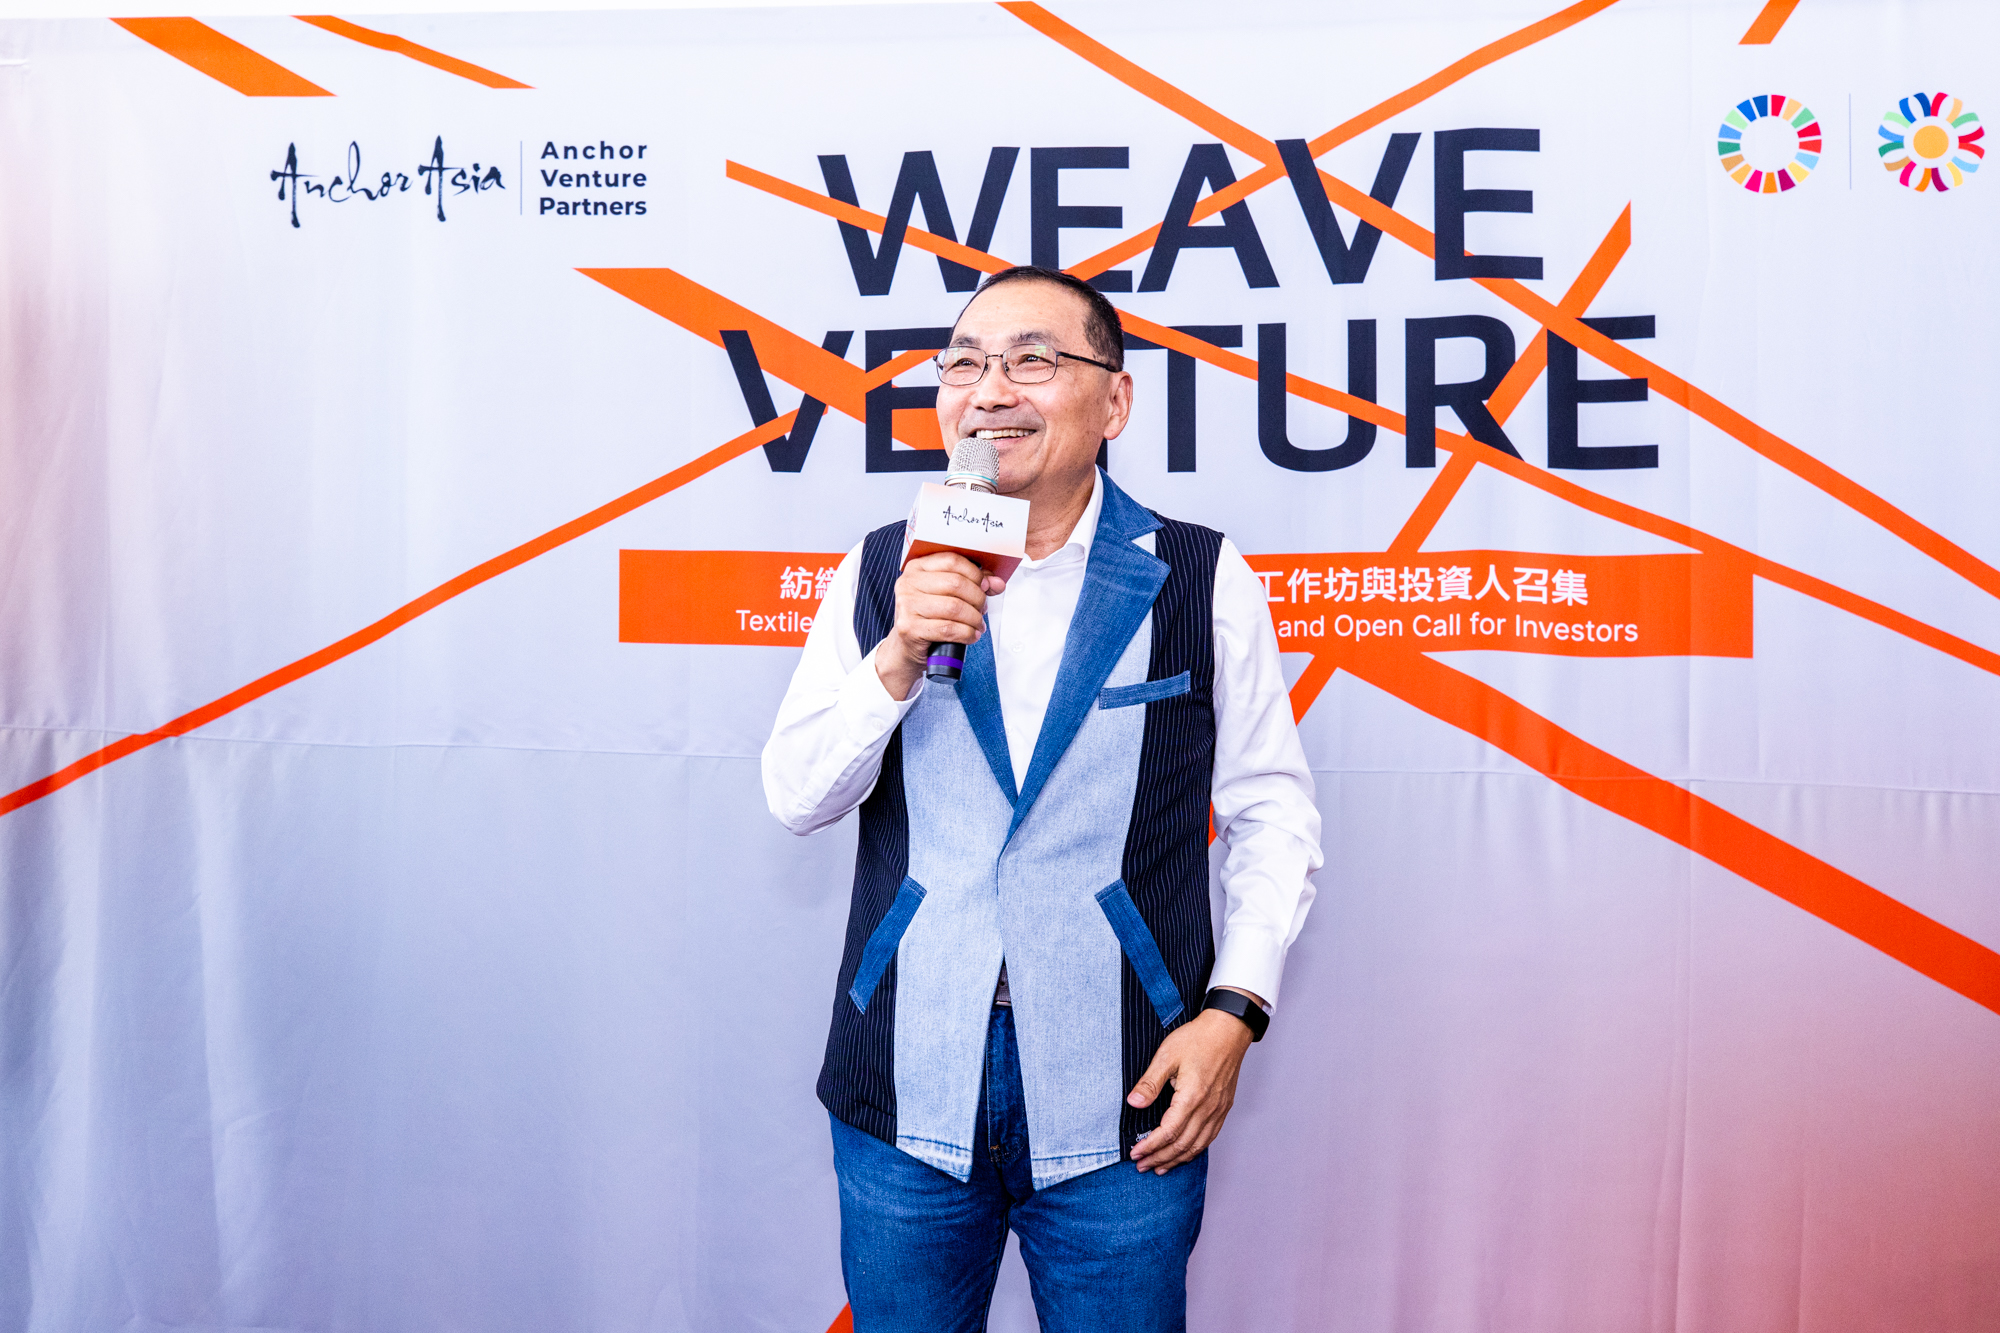 ▲ New Taipei City Mayor Hou Yu-Ih made a stylish appearance at the networking reception by donning a fashionable vest crafted from his own old denim jeans. (Image Source: Anchor Asia)